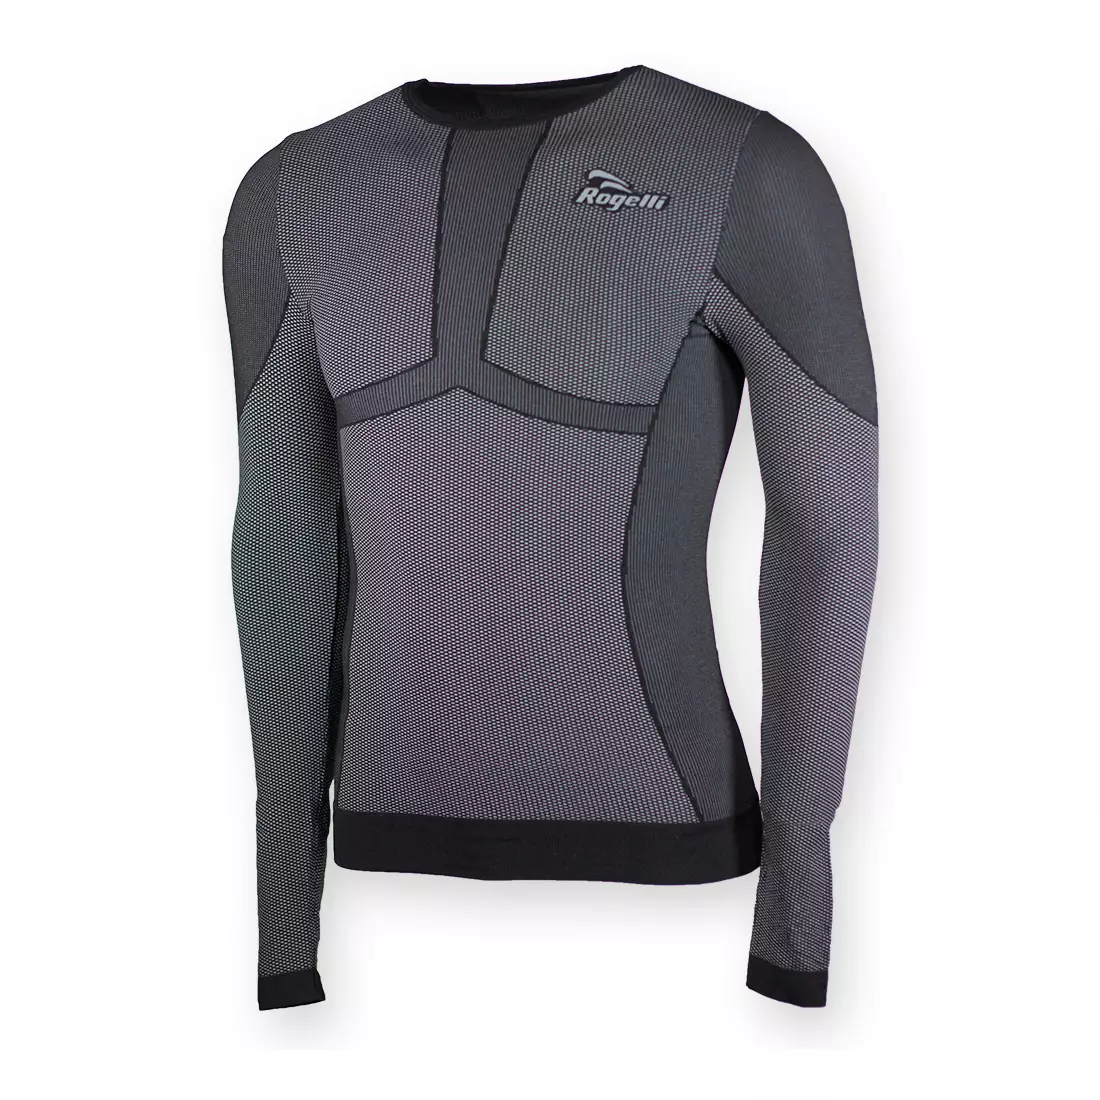 ROGELLI CHASE - 070.006 - thermal underwear - men's long-sleeved T-shirt - color: Black